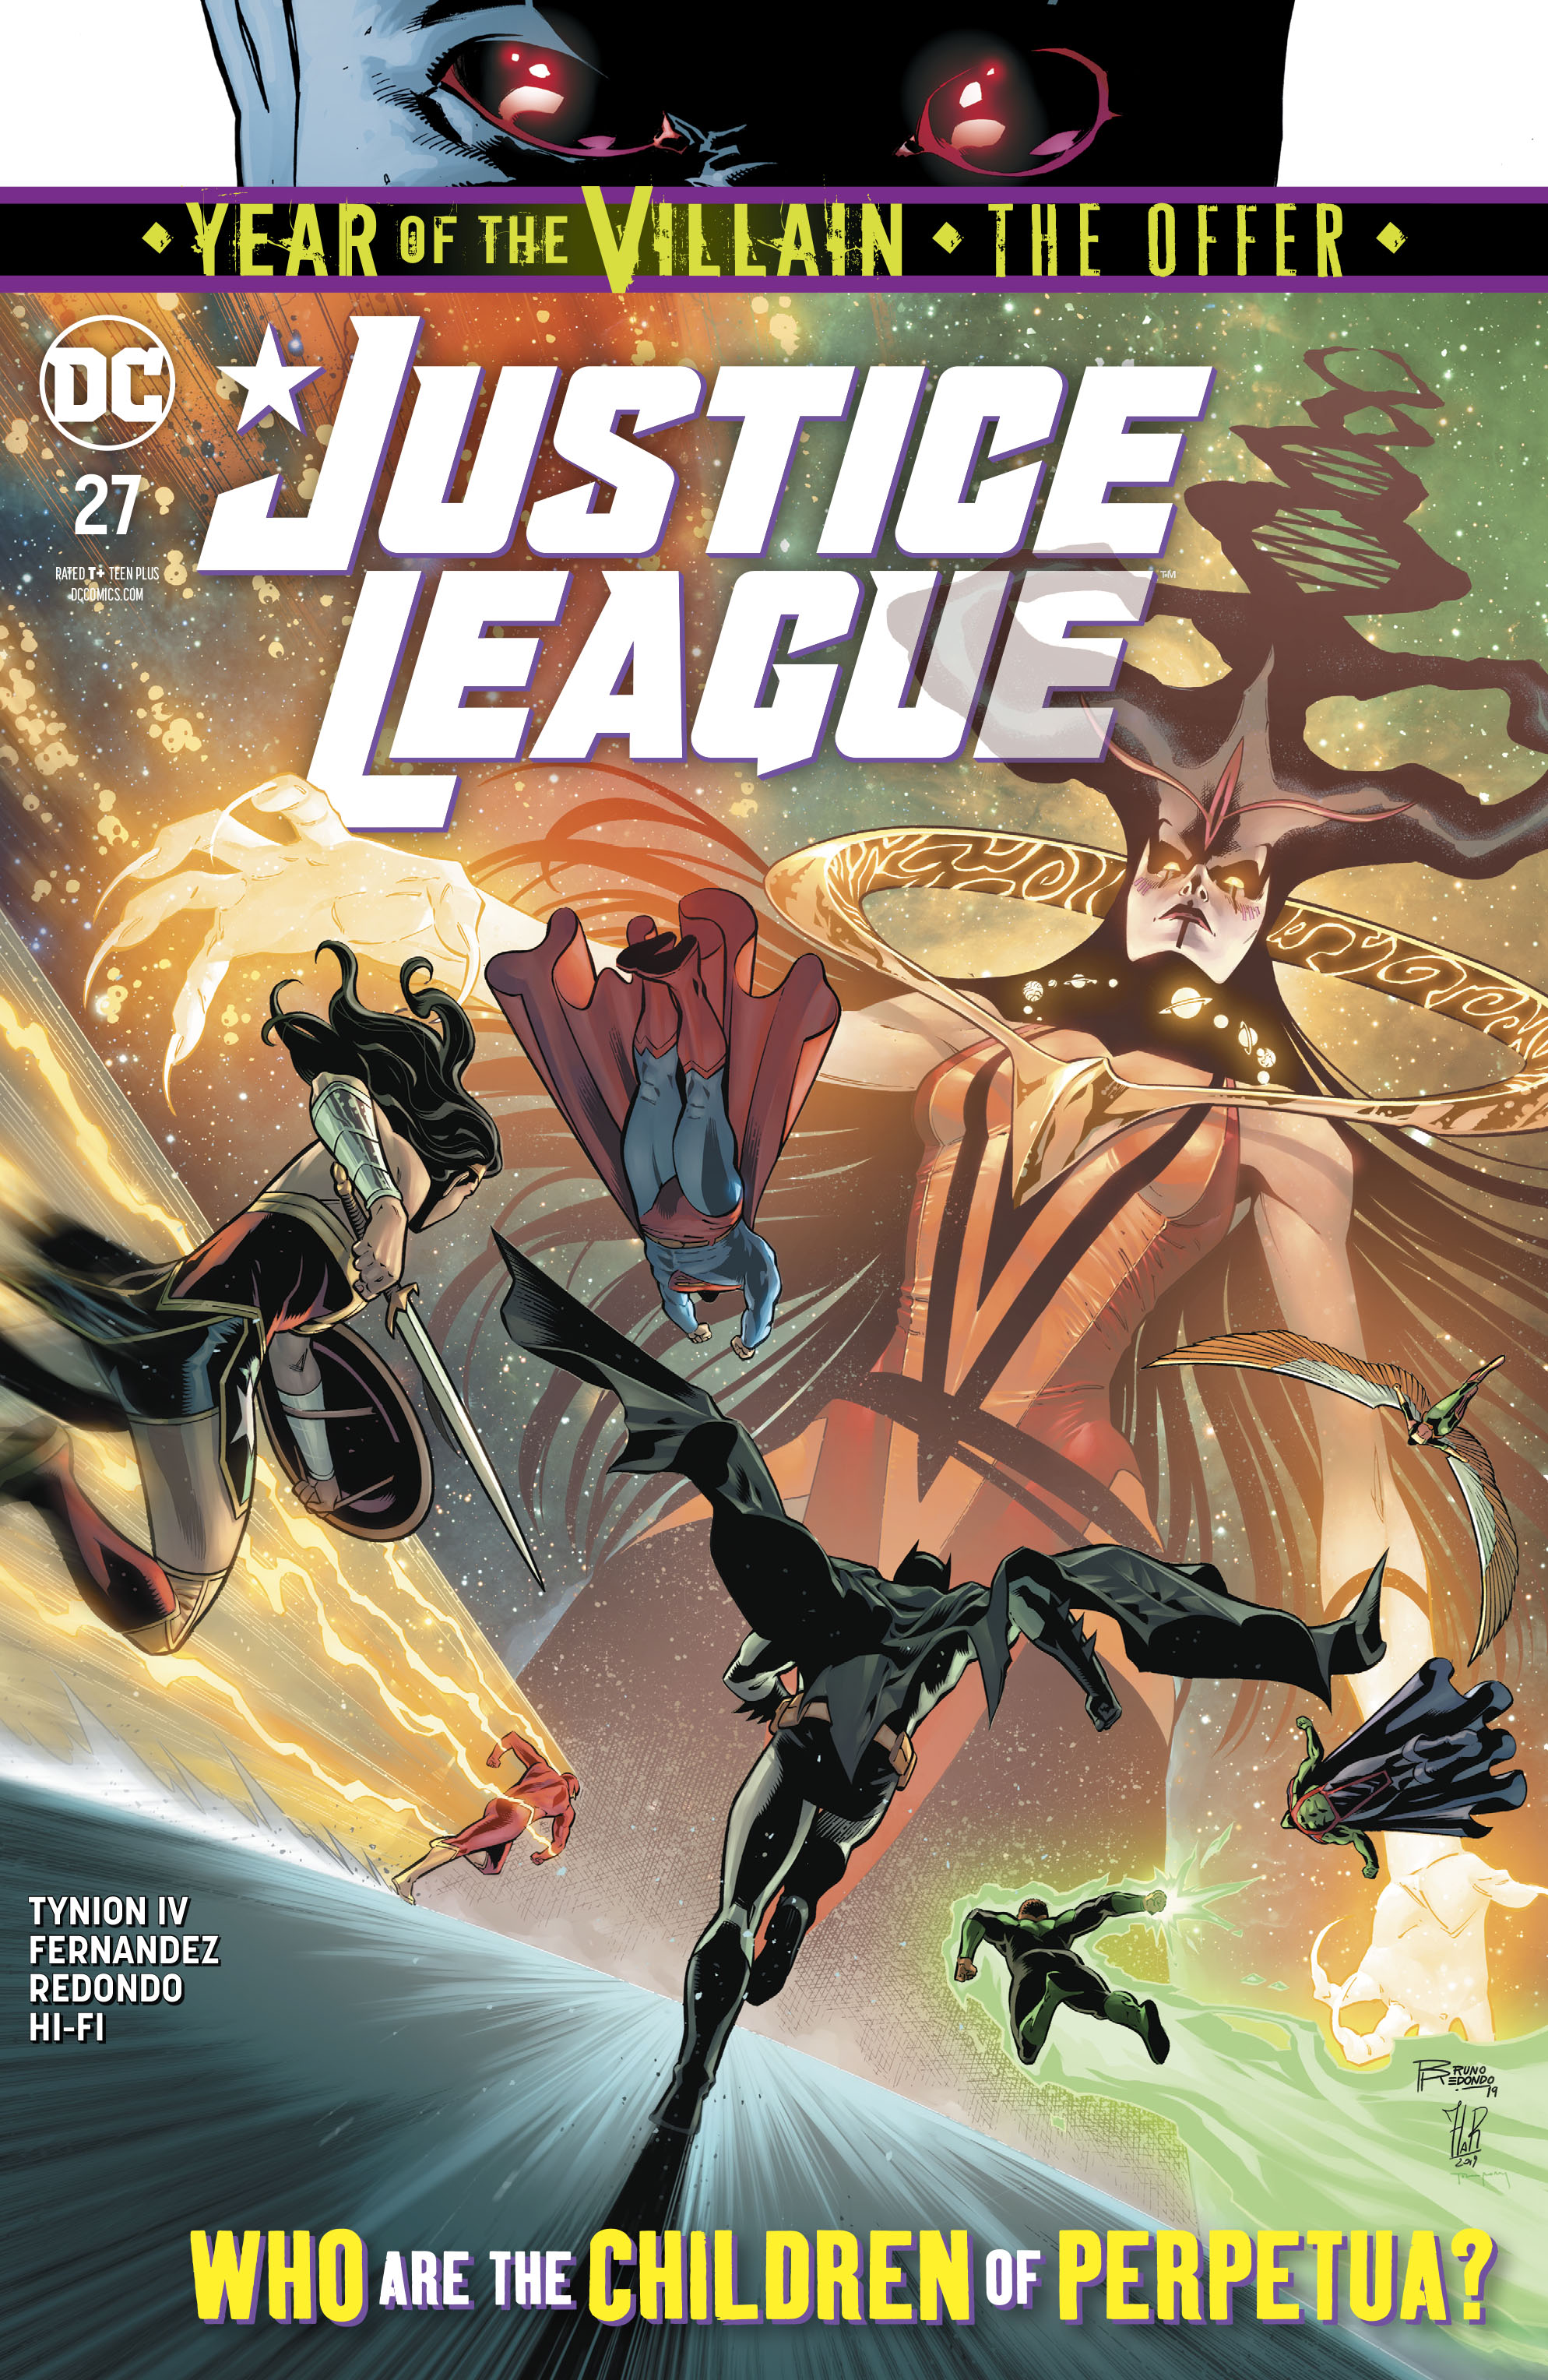 Justice League #27 Year of the Villain The Offer (2018)